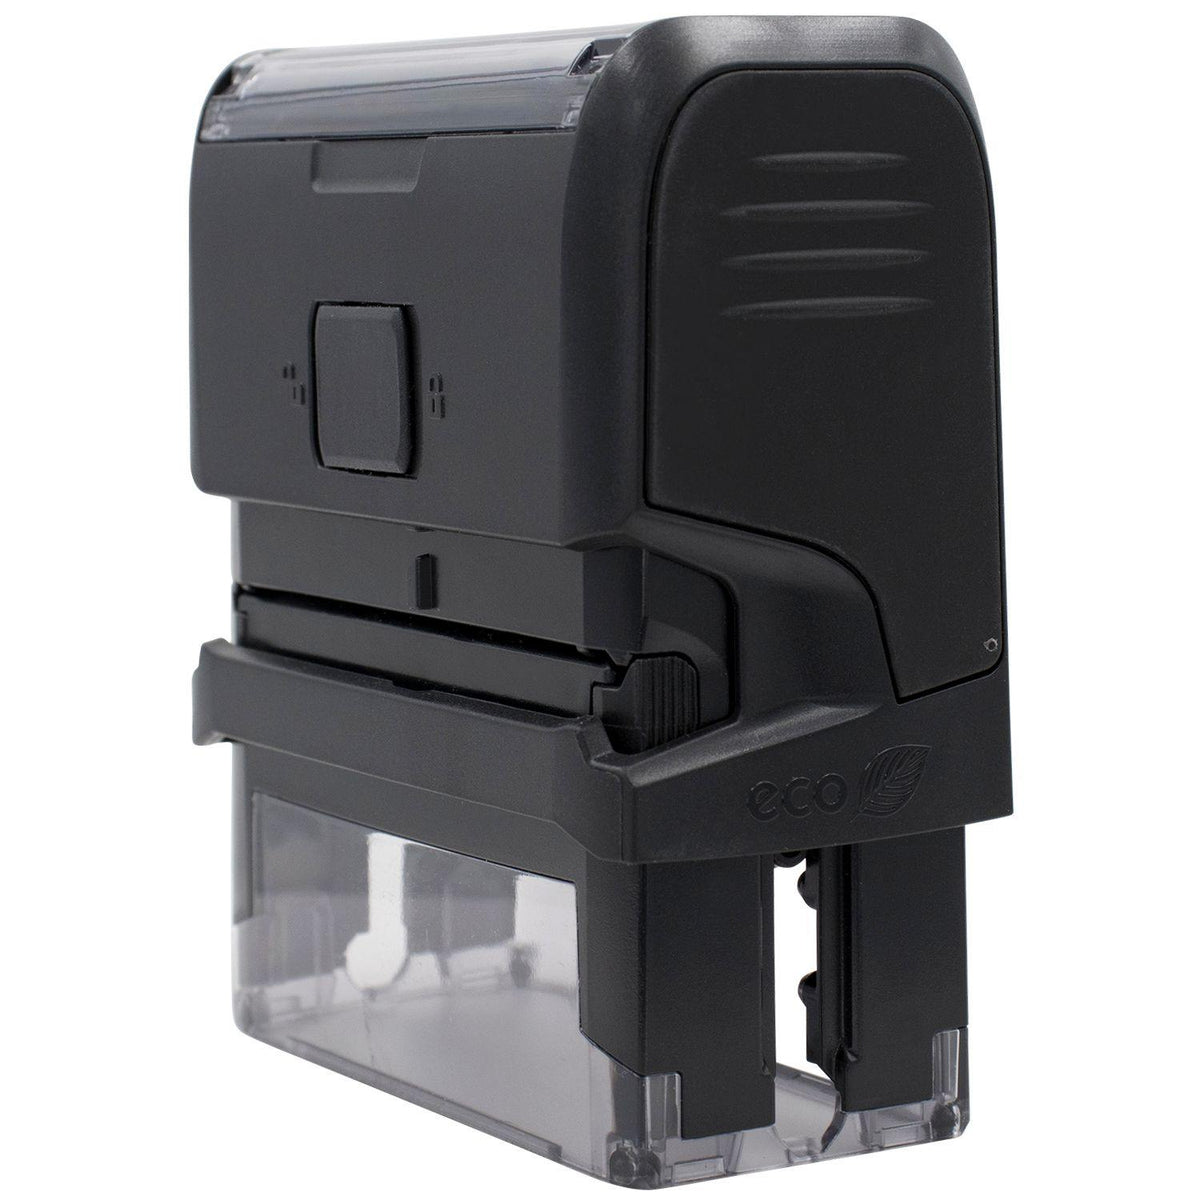 Self-Inking Superkid Stamp - Engineer Seal Stamps - Brand_Trodat, Impression Size_Small, Stamp Type_Self-Inking Stamp, Type of Use_Teacher